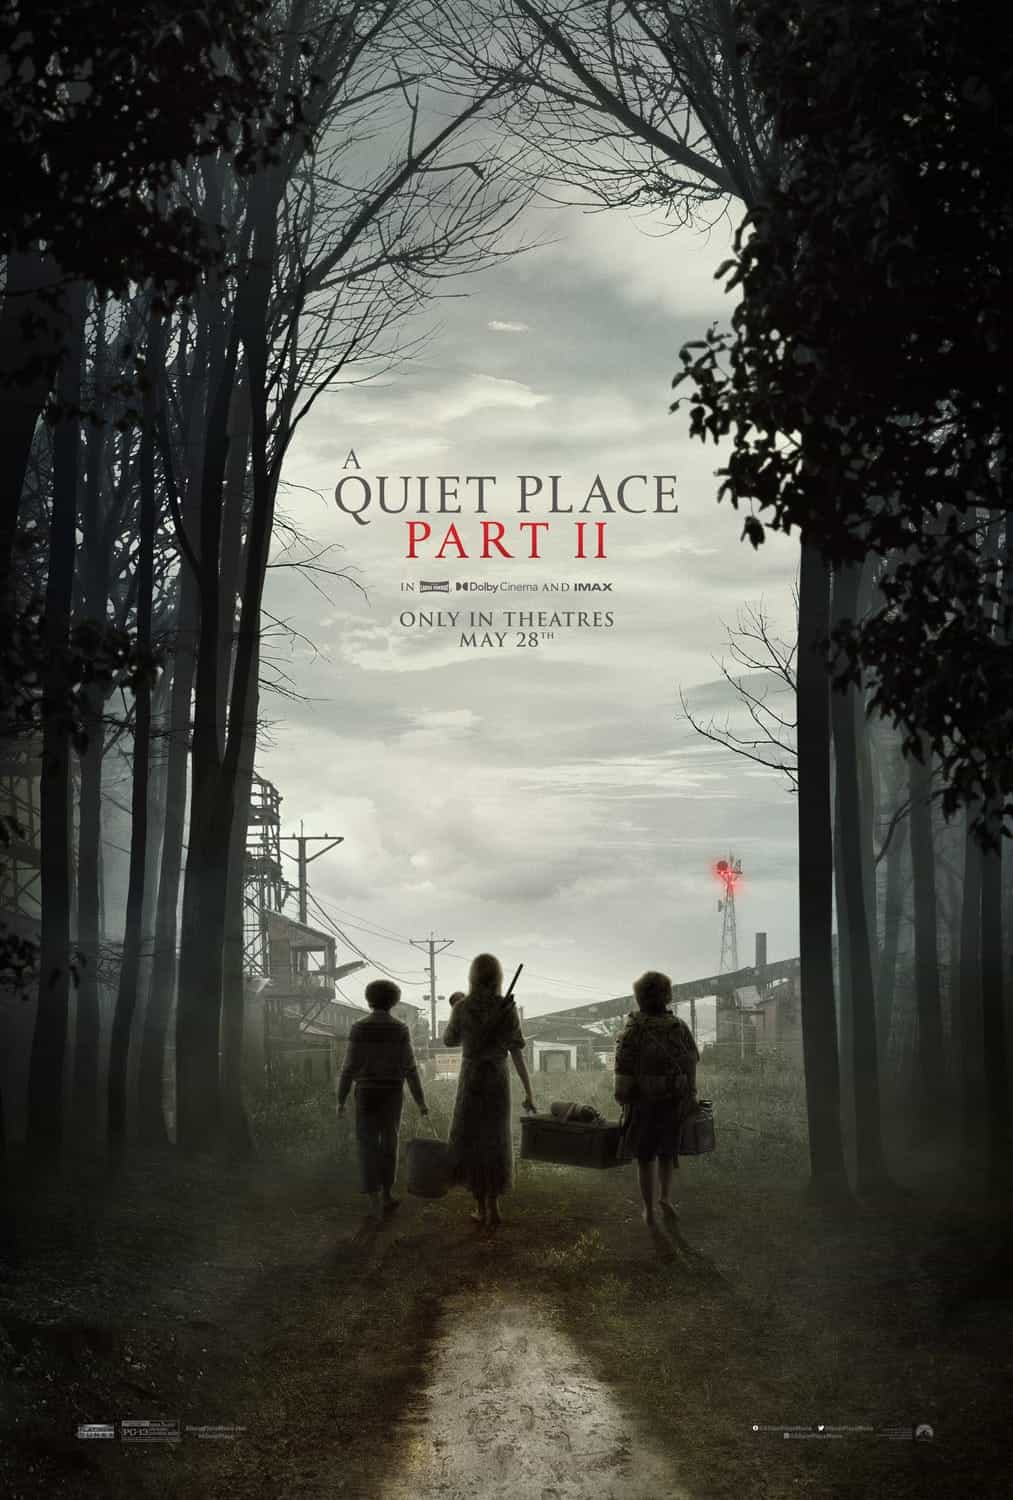 A Quiet Place Part II, due for release March 19th, gets put back due to global coronavirus issues